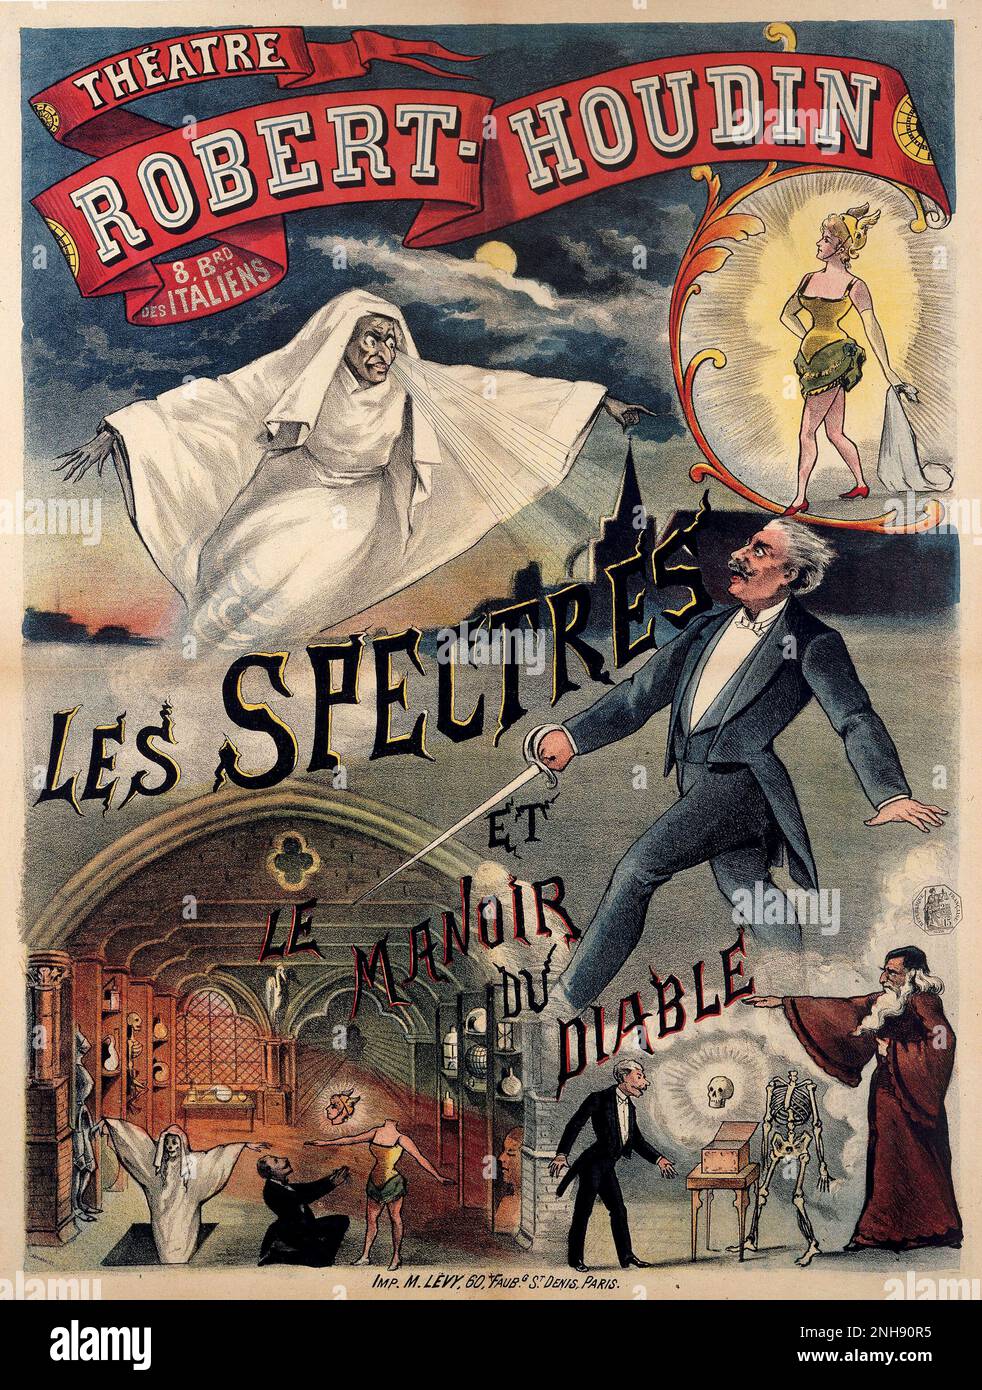 Poster for the movie Le Manoir du diable at Theatre Robert-Houdin in Paris, 1896. Le Manoir du diable or The House of the Devil, released in the United States as The Haunted Castle and in Britain as The Devil's Castle, is an 1896 French short silent film directed by Georges Melies. Stock Photo